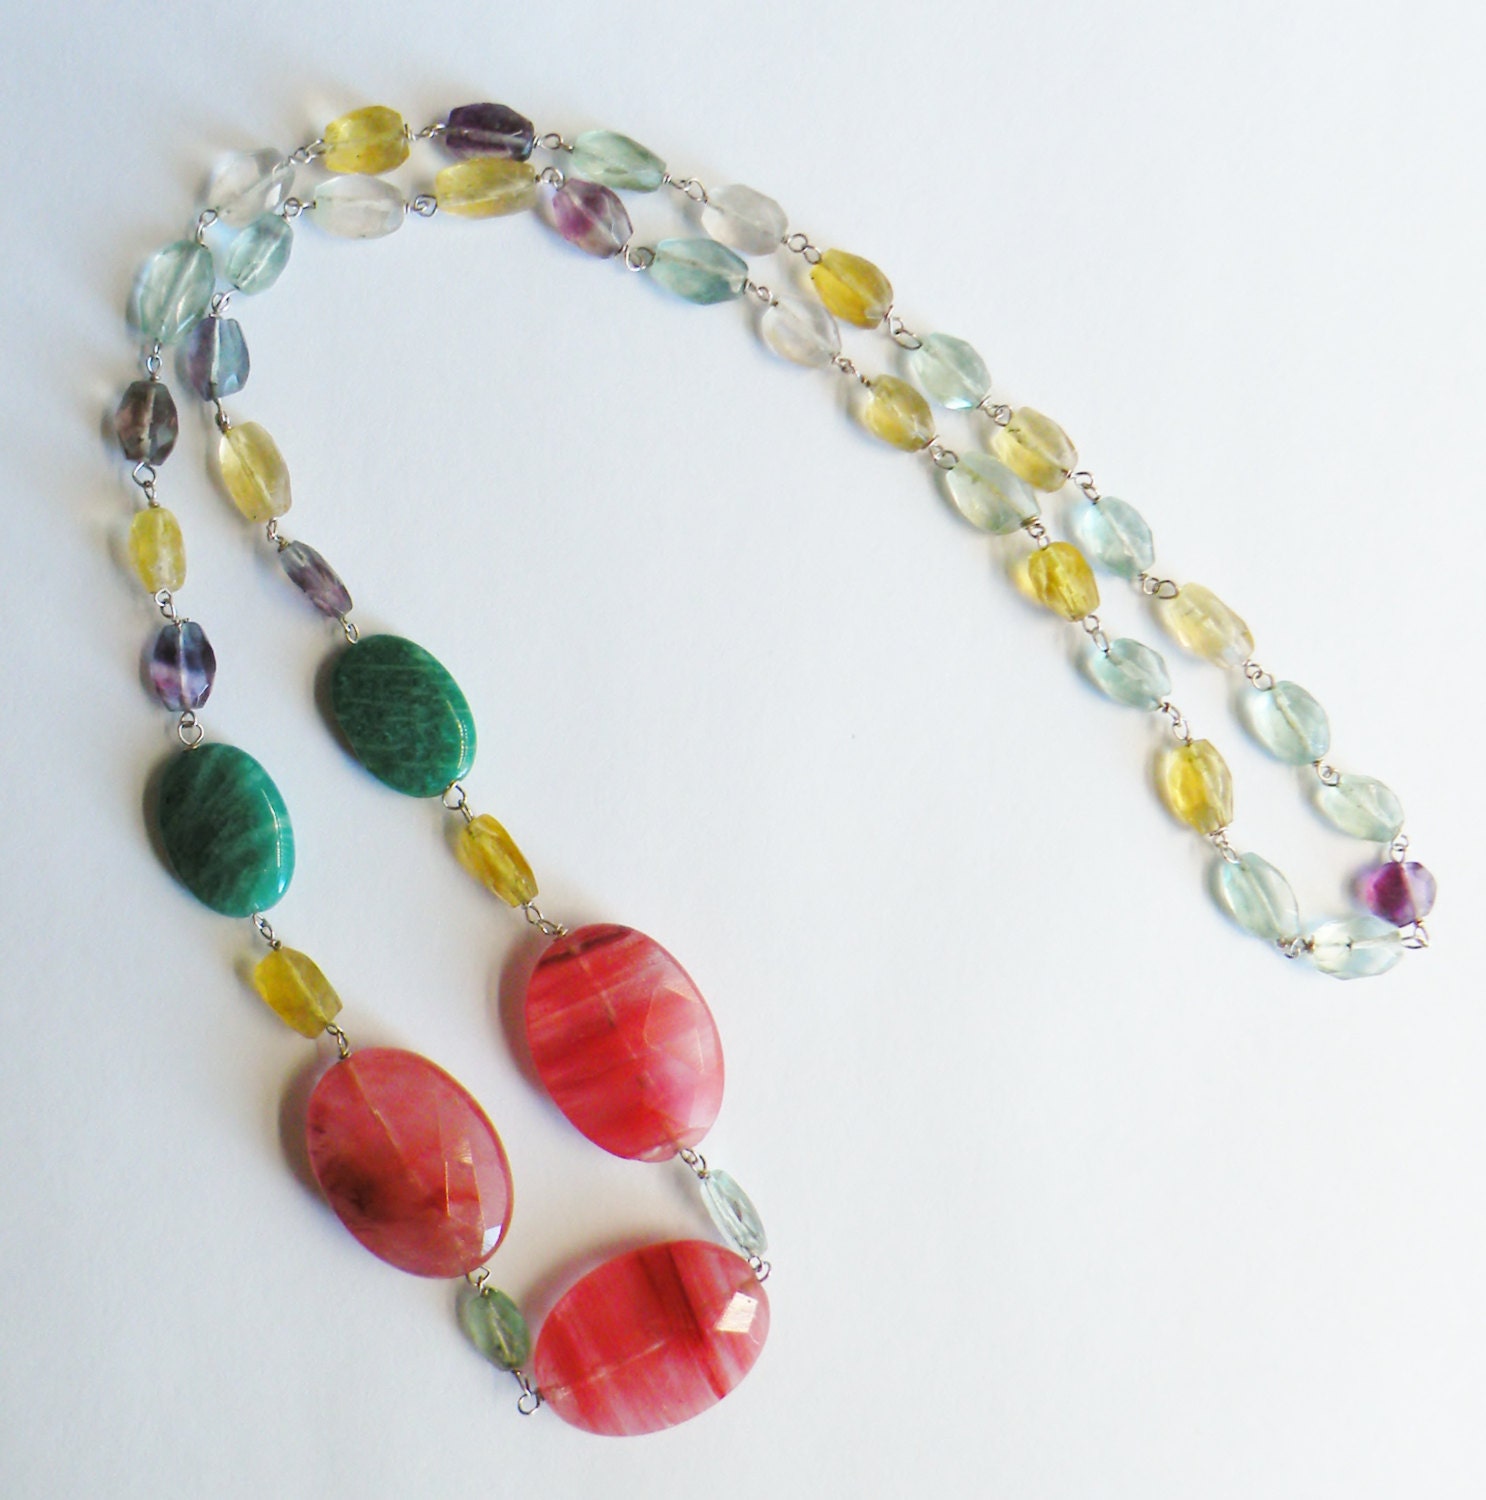 Gemstone Necklace -  Cherry quartz, Amazonite and Fluorite Sterling Silver Handmade Beaded Necklace - Multicolor